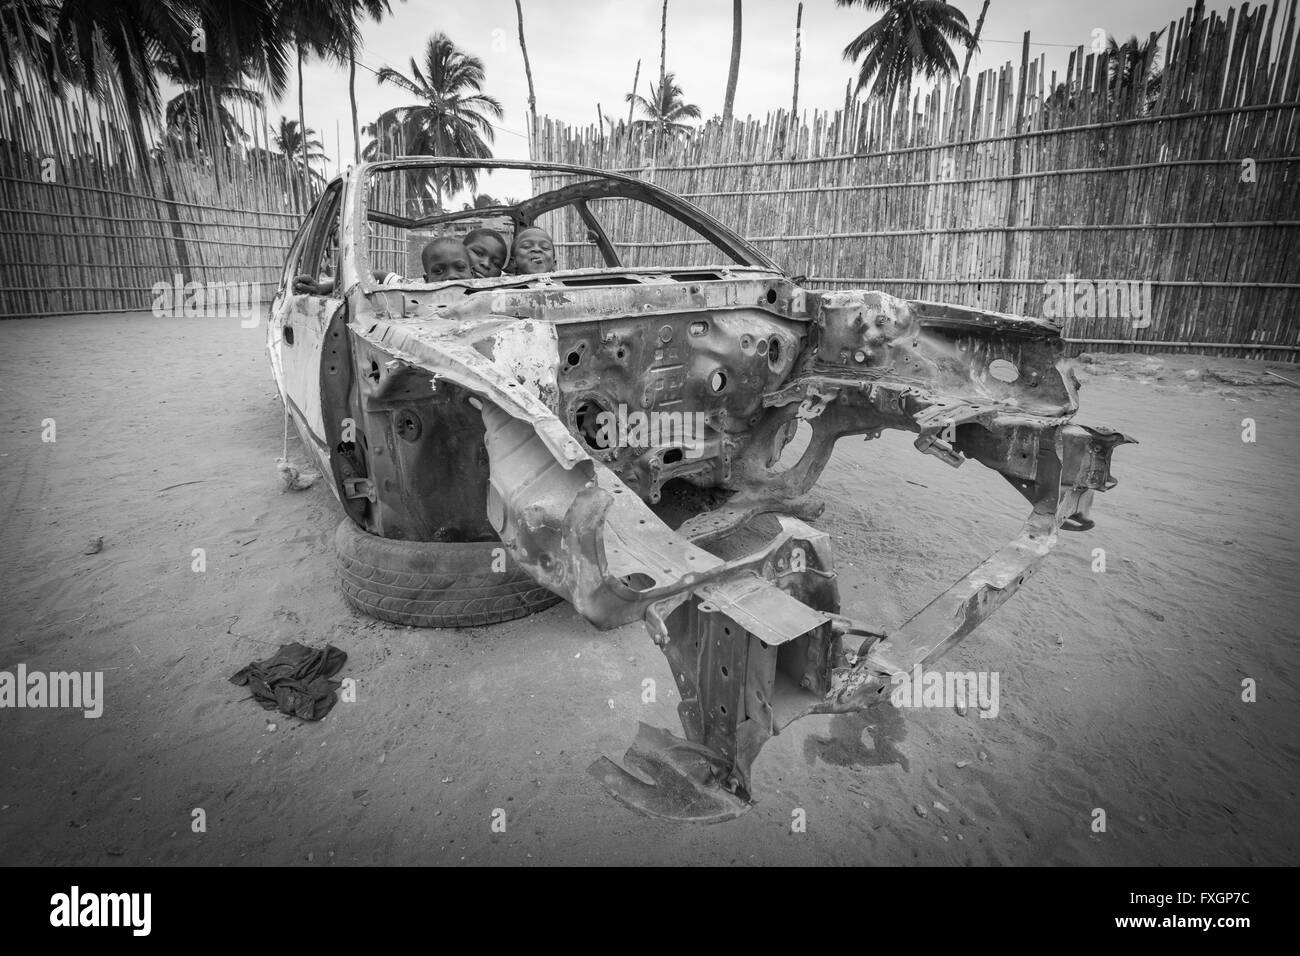 Mozambique, children playing in a damaged car, black and white. Stock Photo